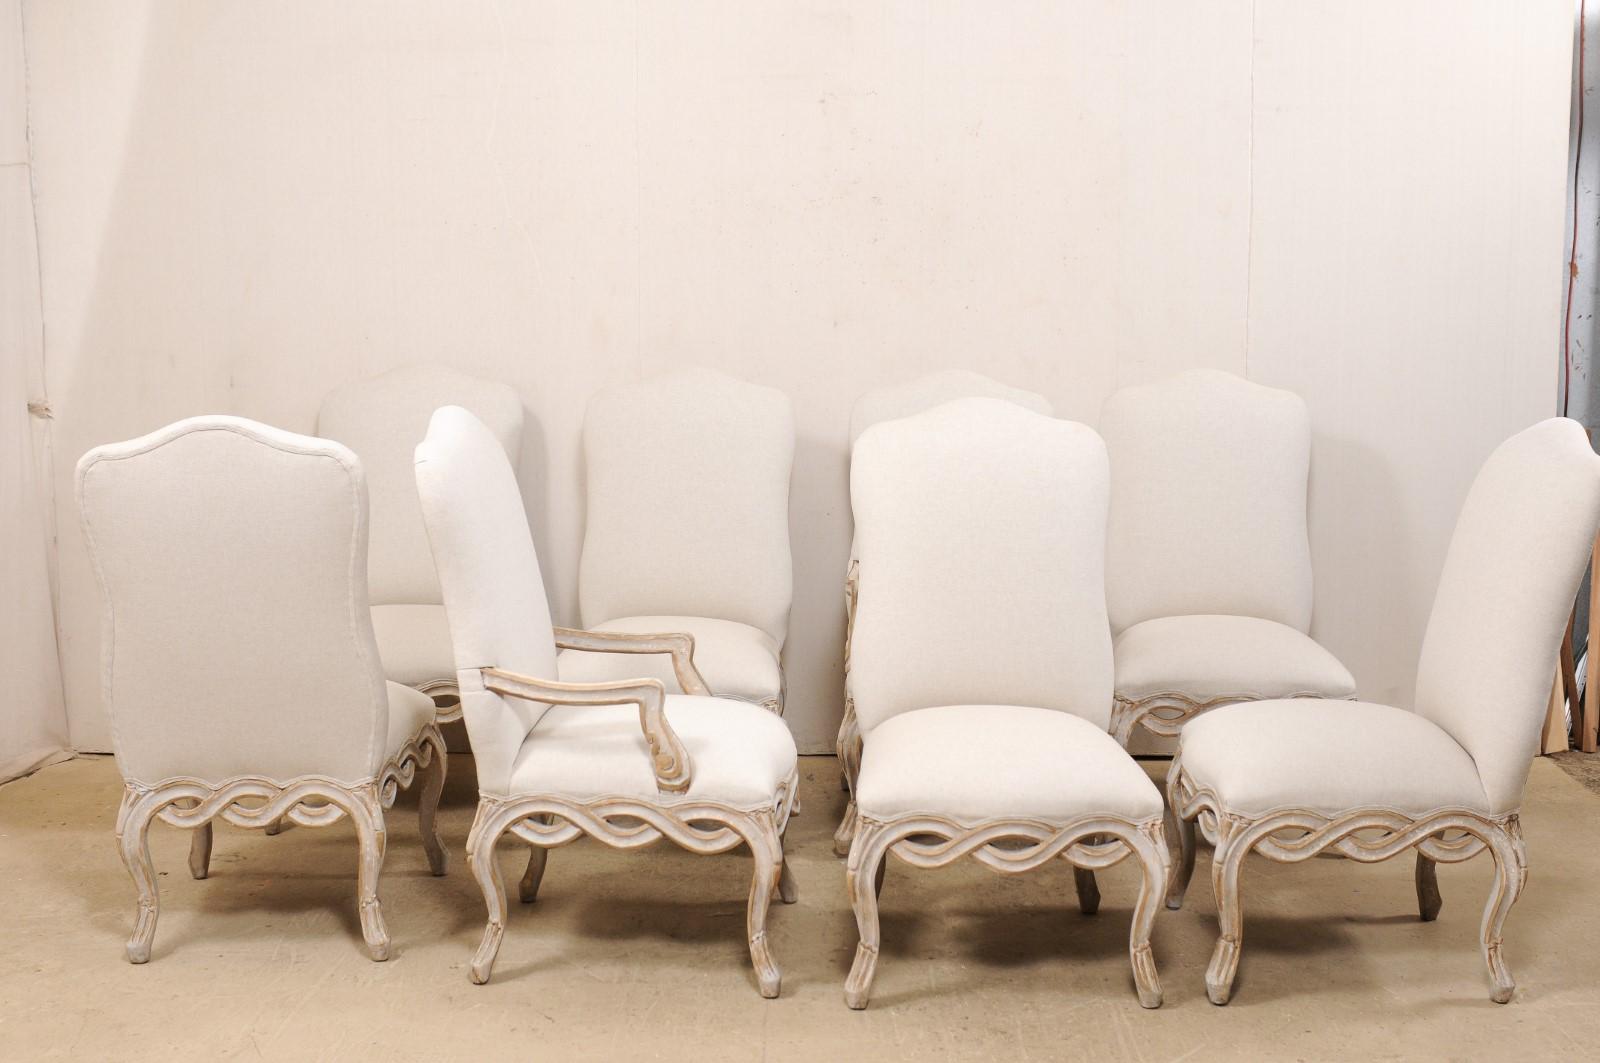 A set of eight American made, Italian Venetian style, carved wood dining chairs with upholstered seats and backs. This vintage set of dining chairs have been beautifully crafted in a Venetian Italian style, and feature subtle hourglass-shaped